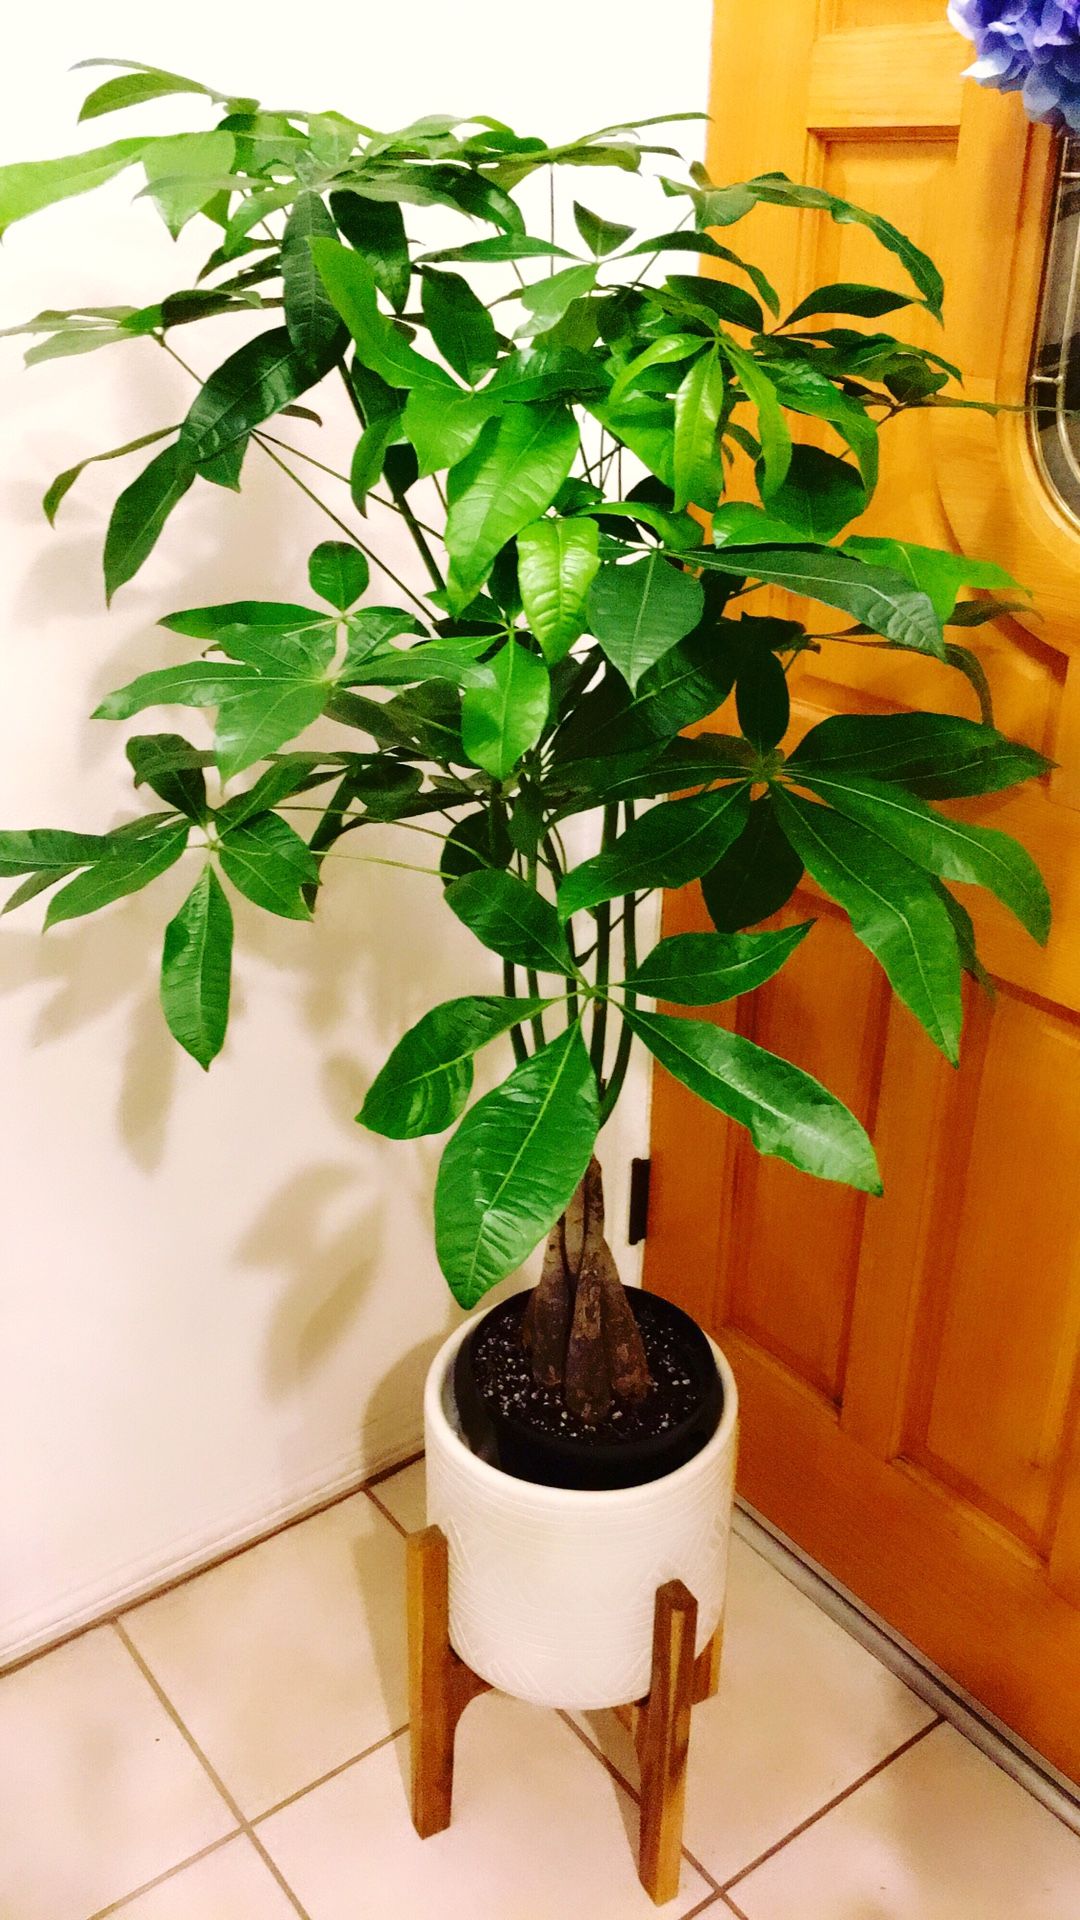 Big and Tall Money Tree - Just the plant only - About 45” Total - $28 - PLANTER NOT INCLUDED